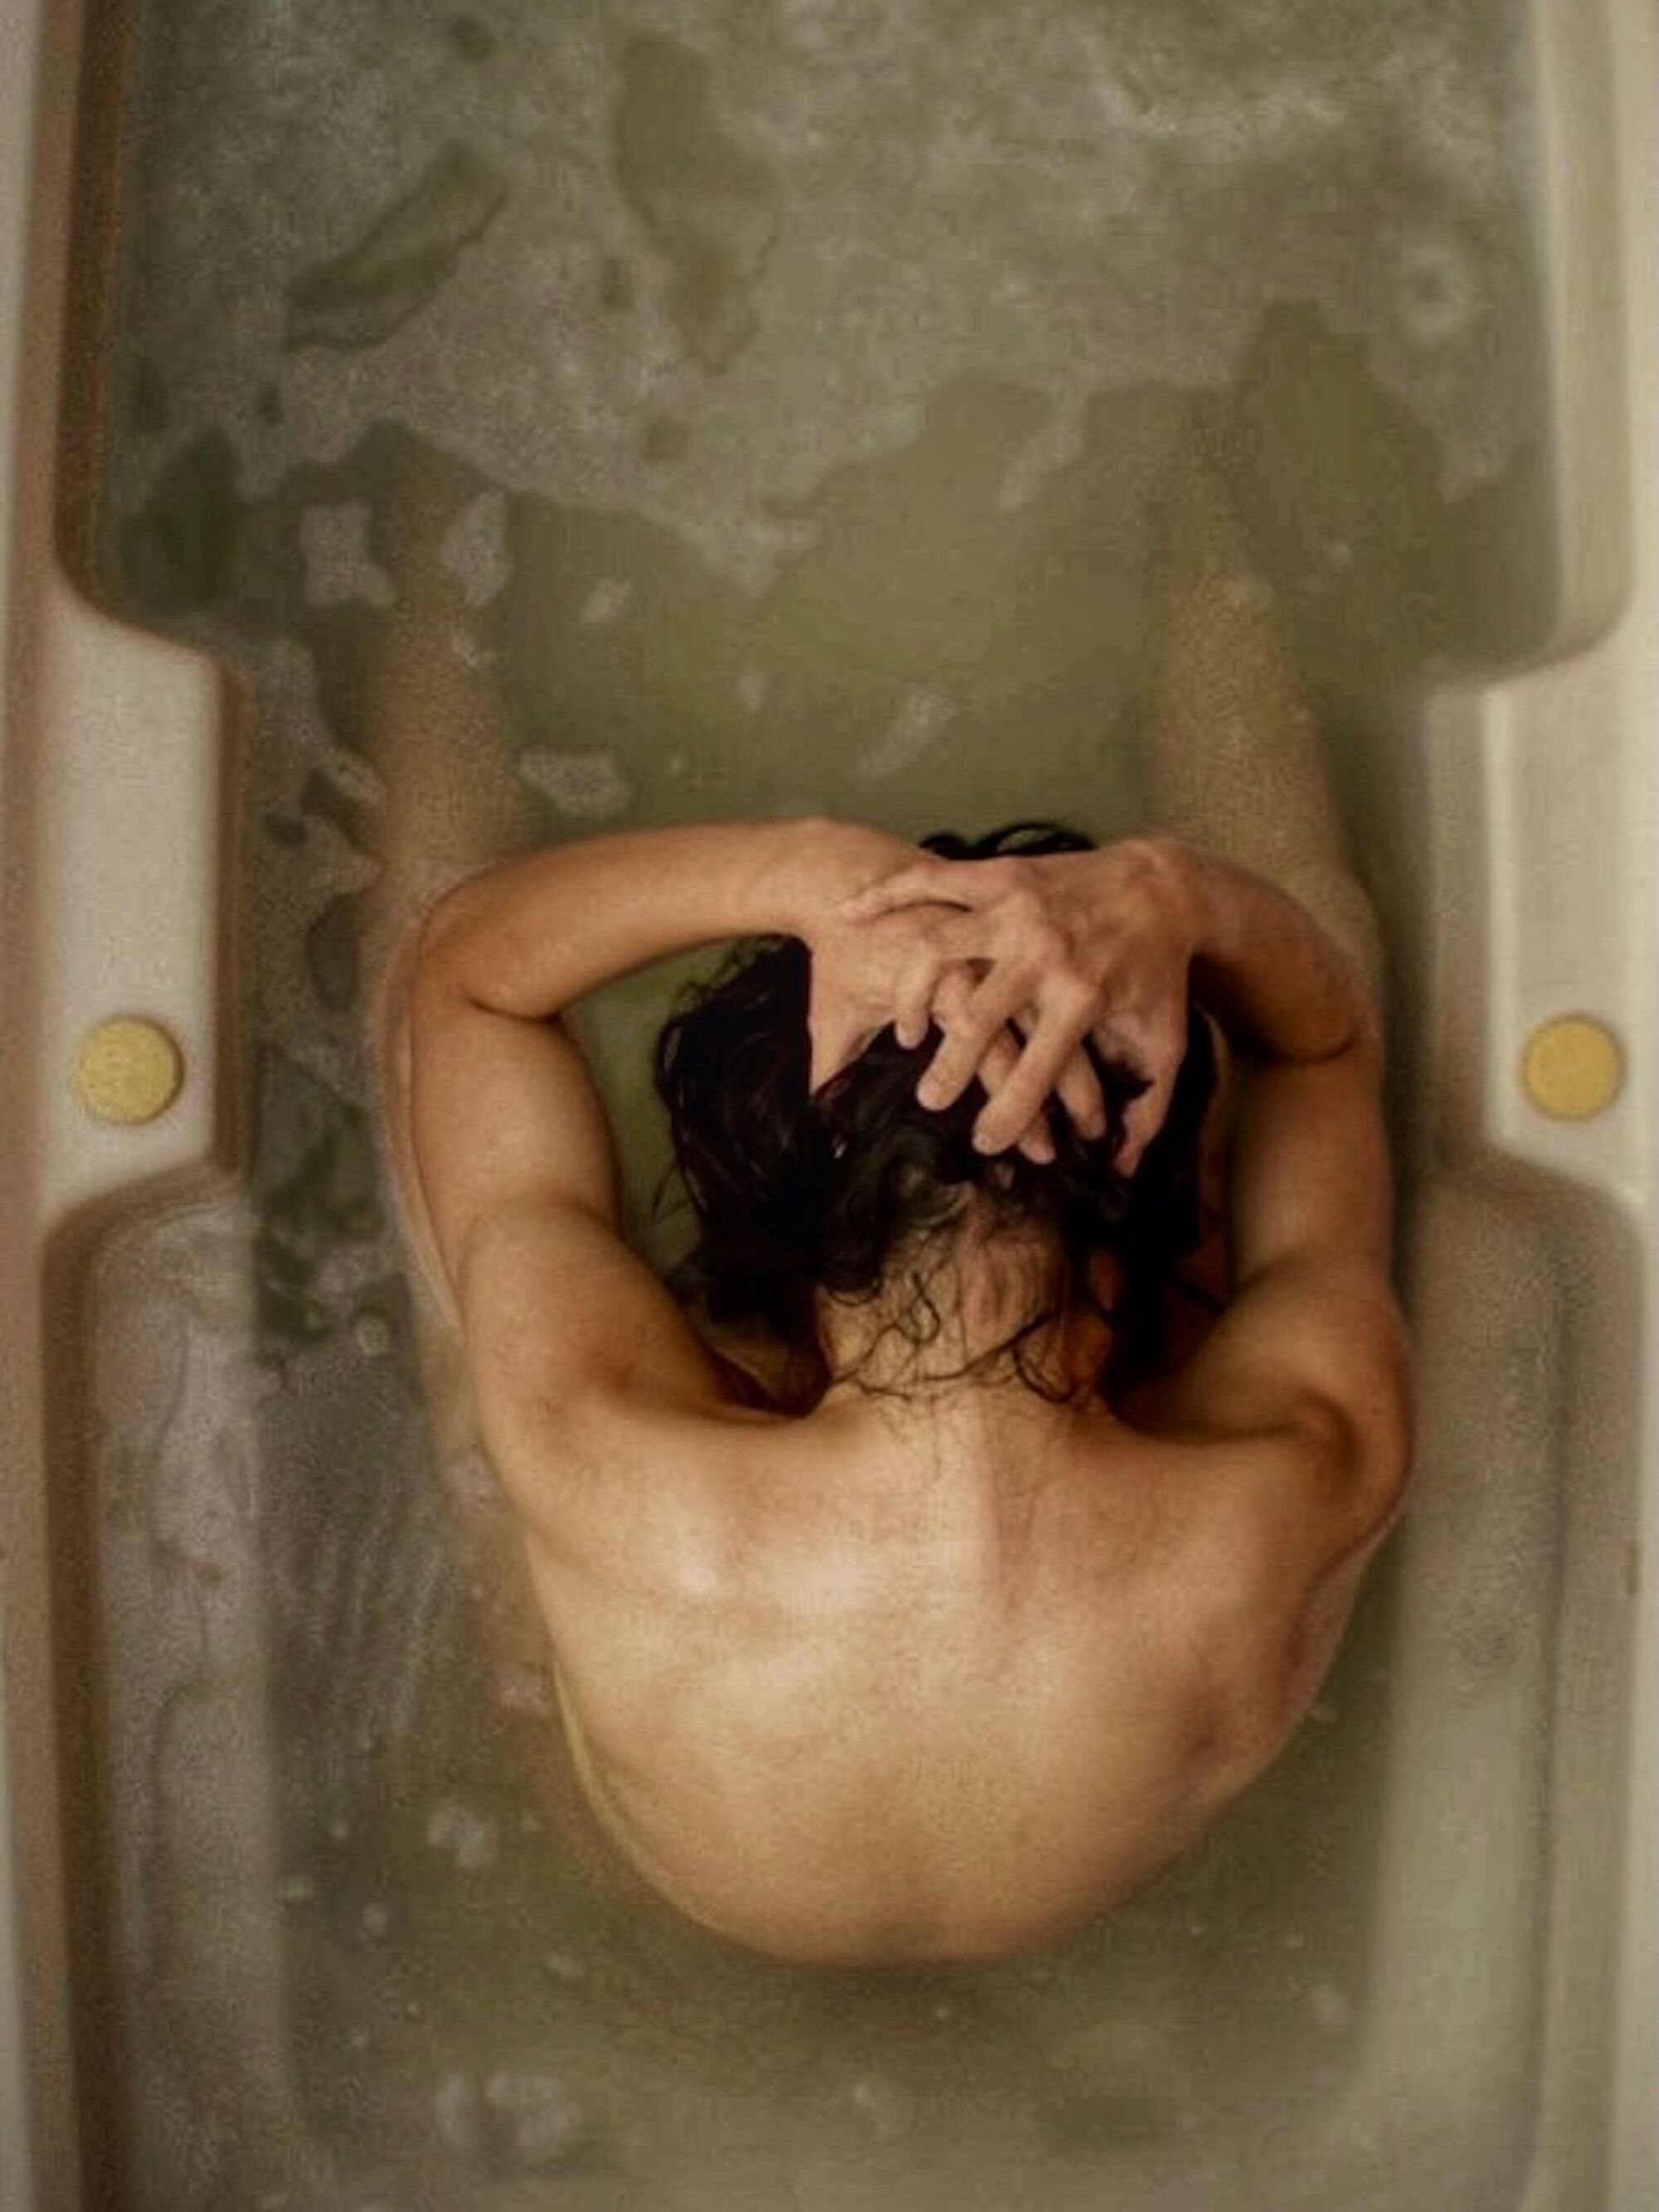 A person seen from above, sitting nude in a bathtub, hands on head.